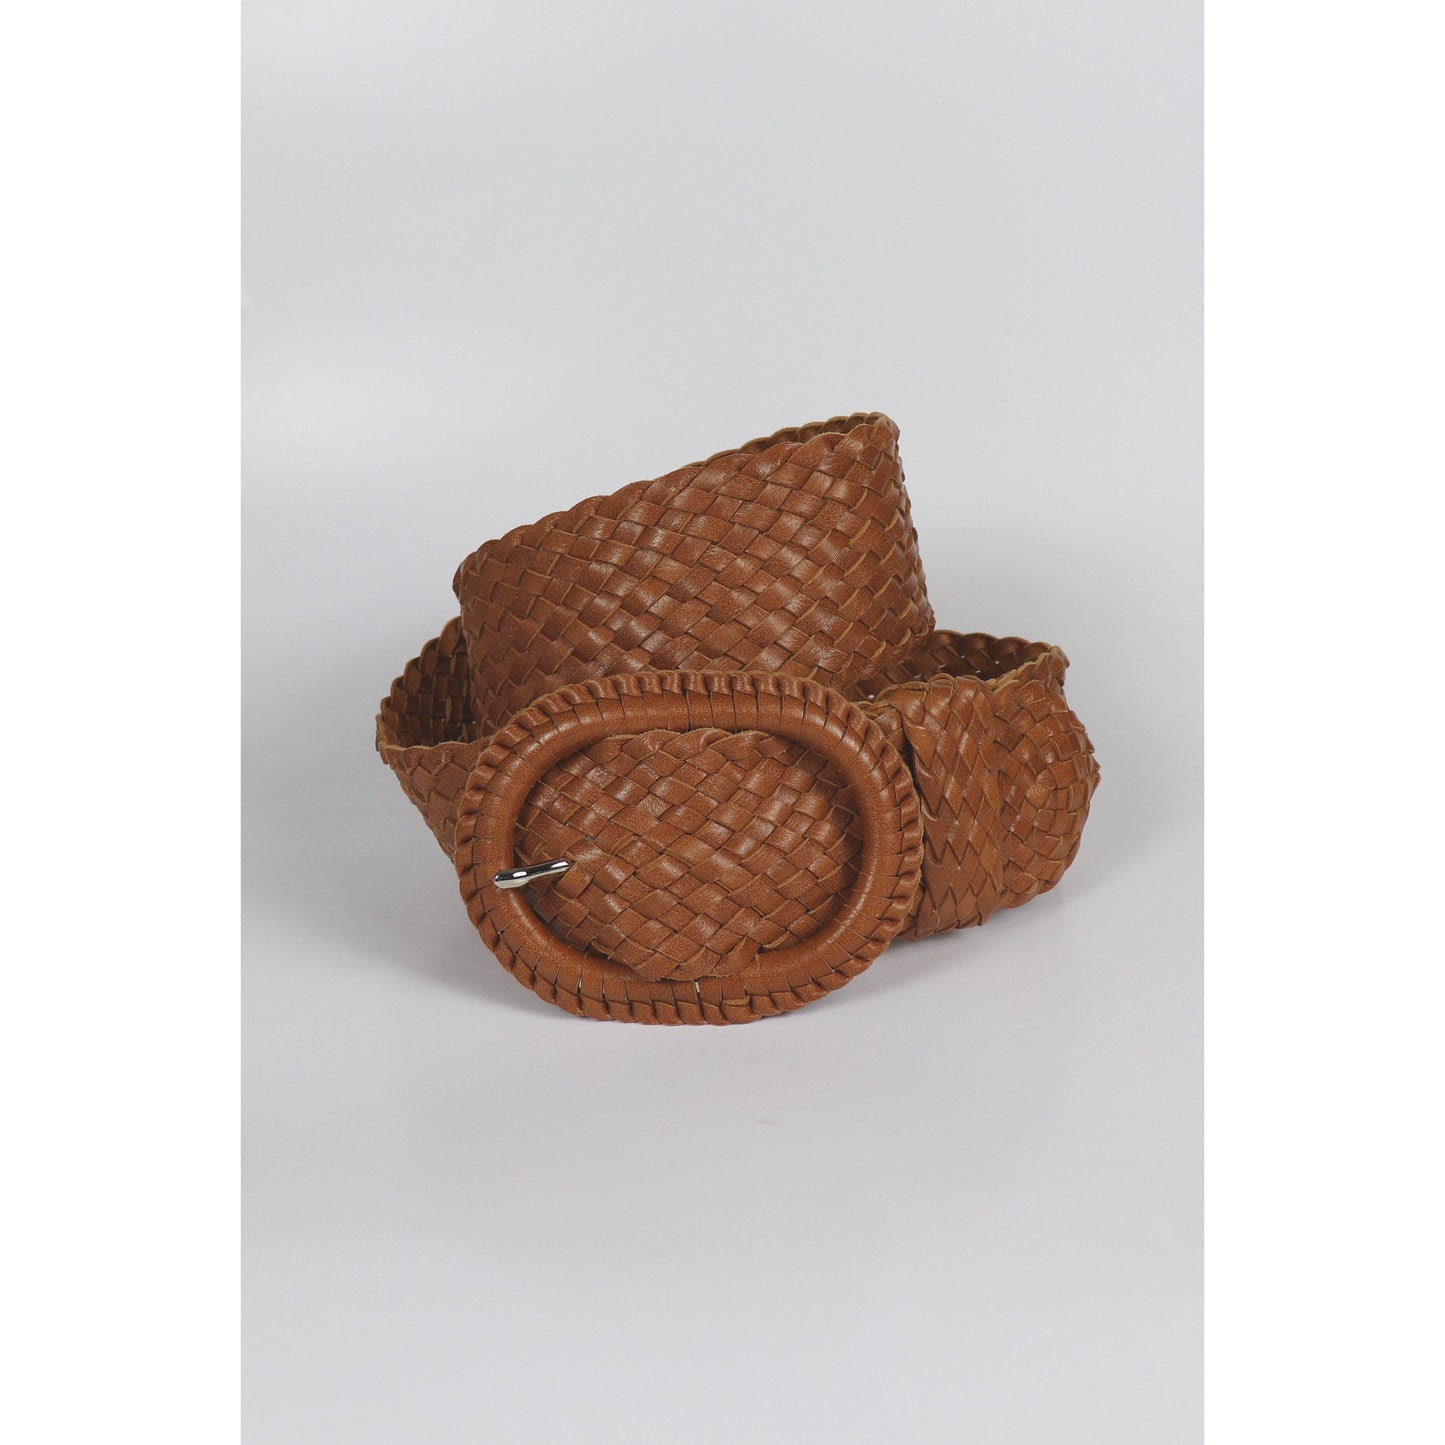 Woven leather belt with buckle.